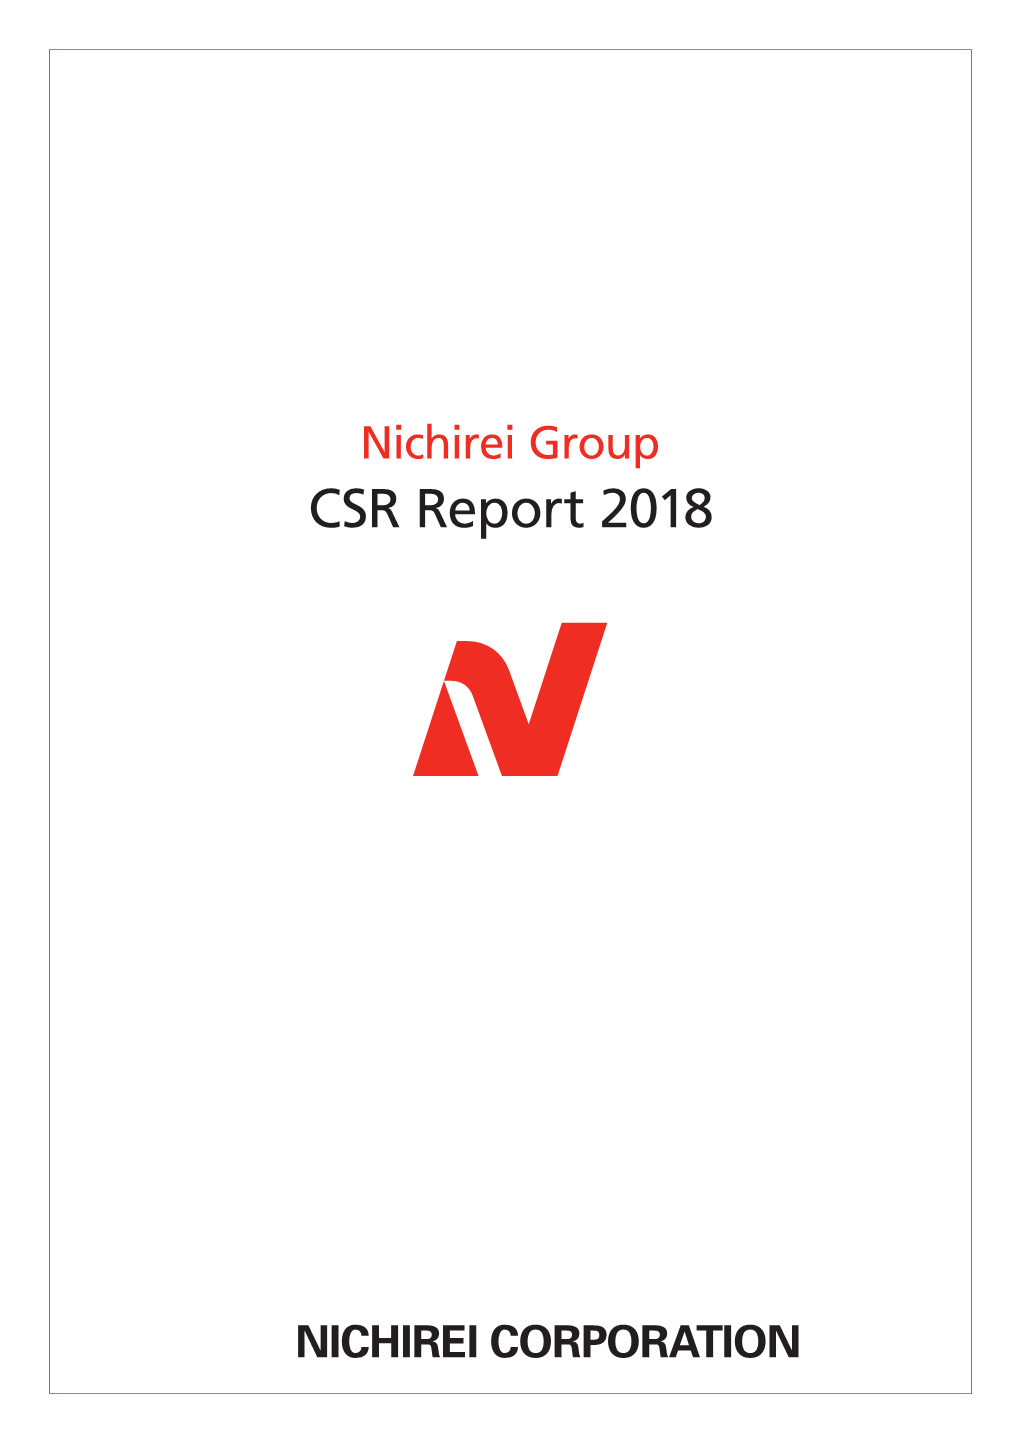 Third-Party Opinion of the Nichirei Group CSR Report 2018